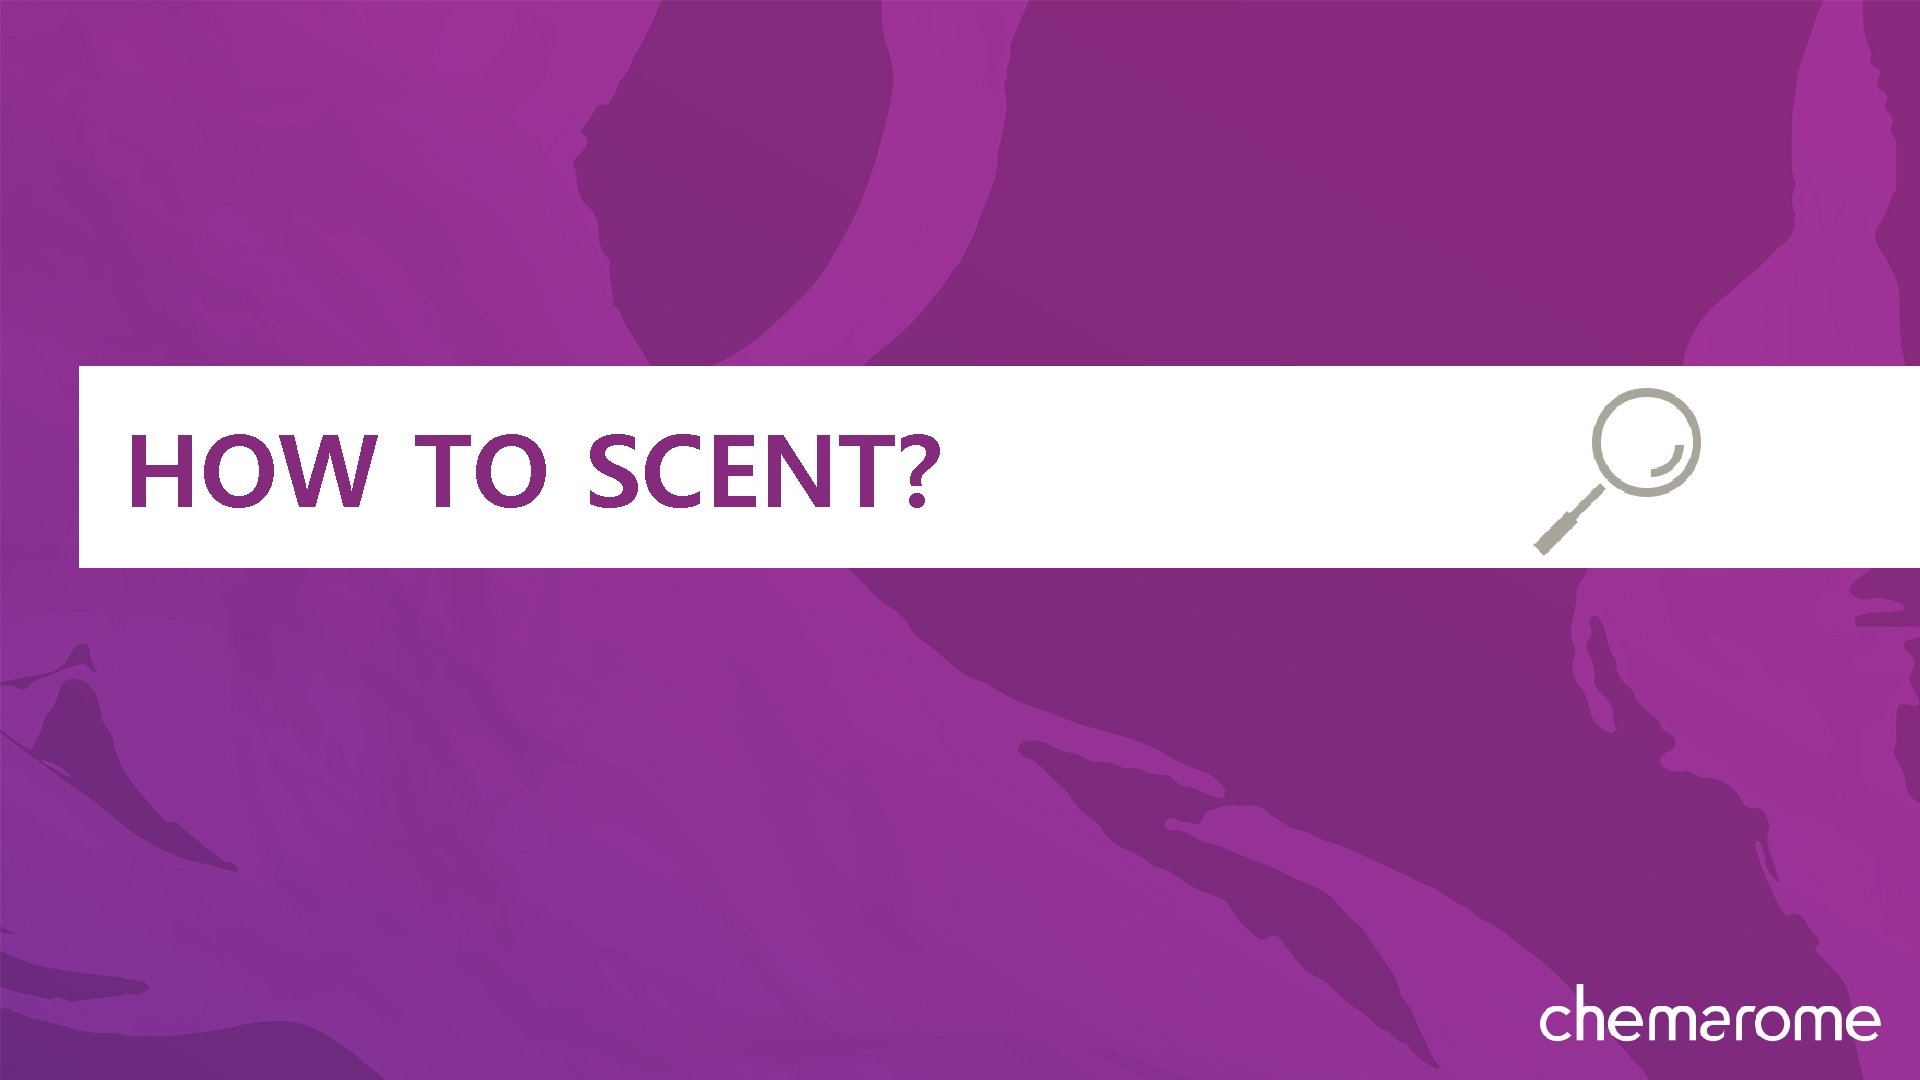 HOW TO SCENT? 